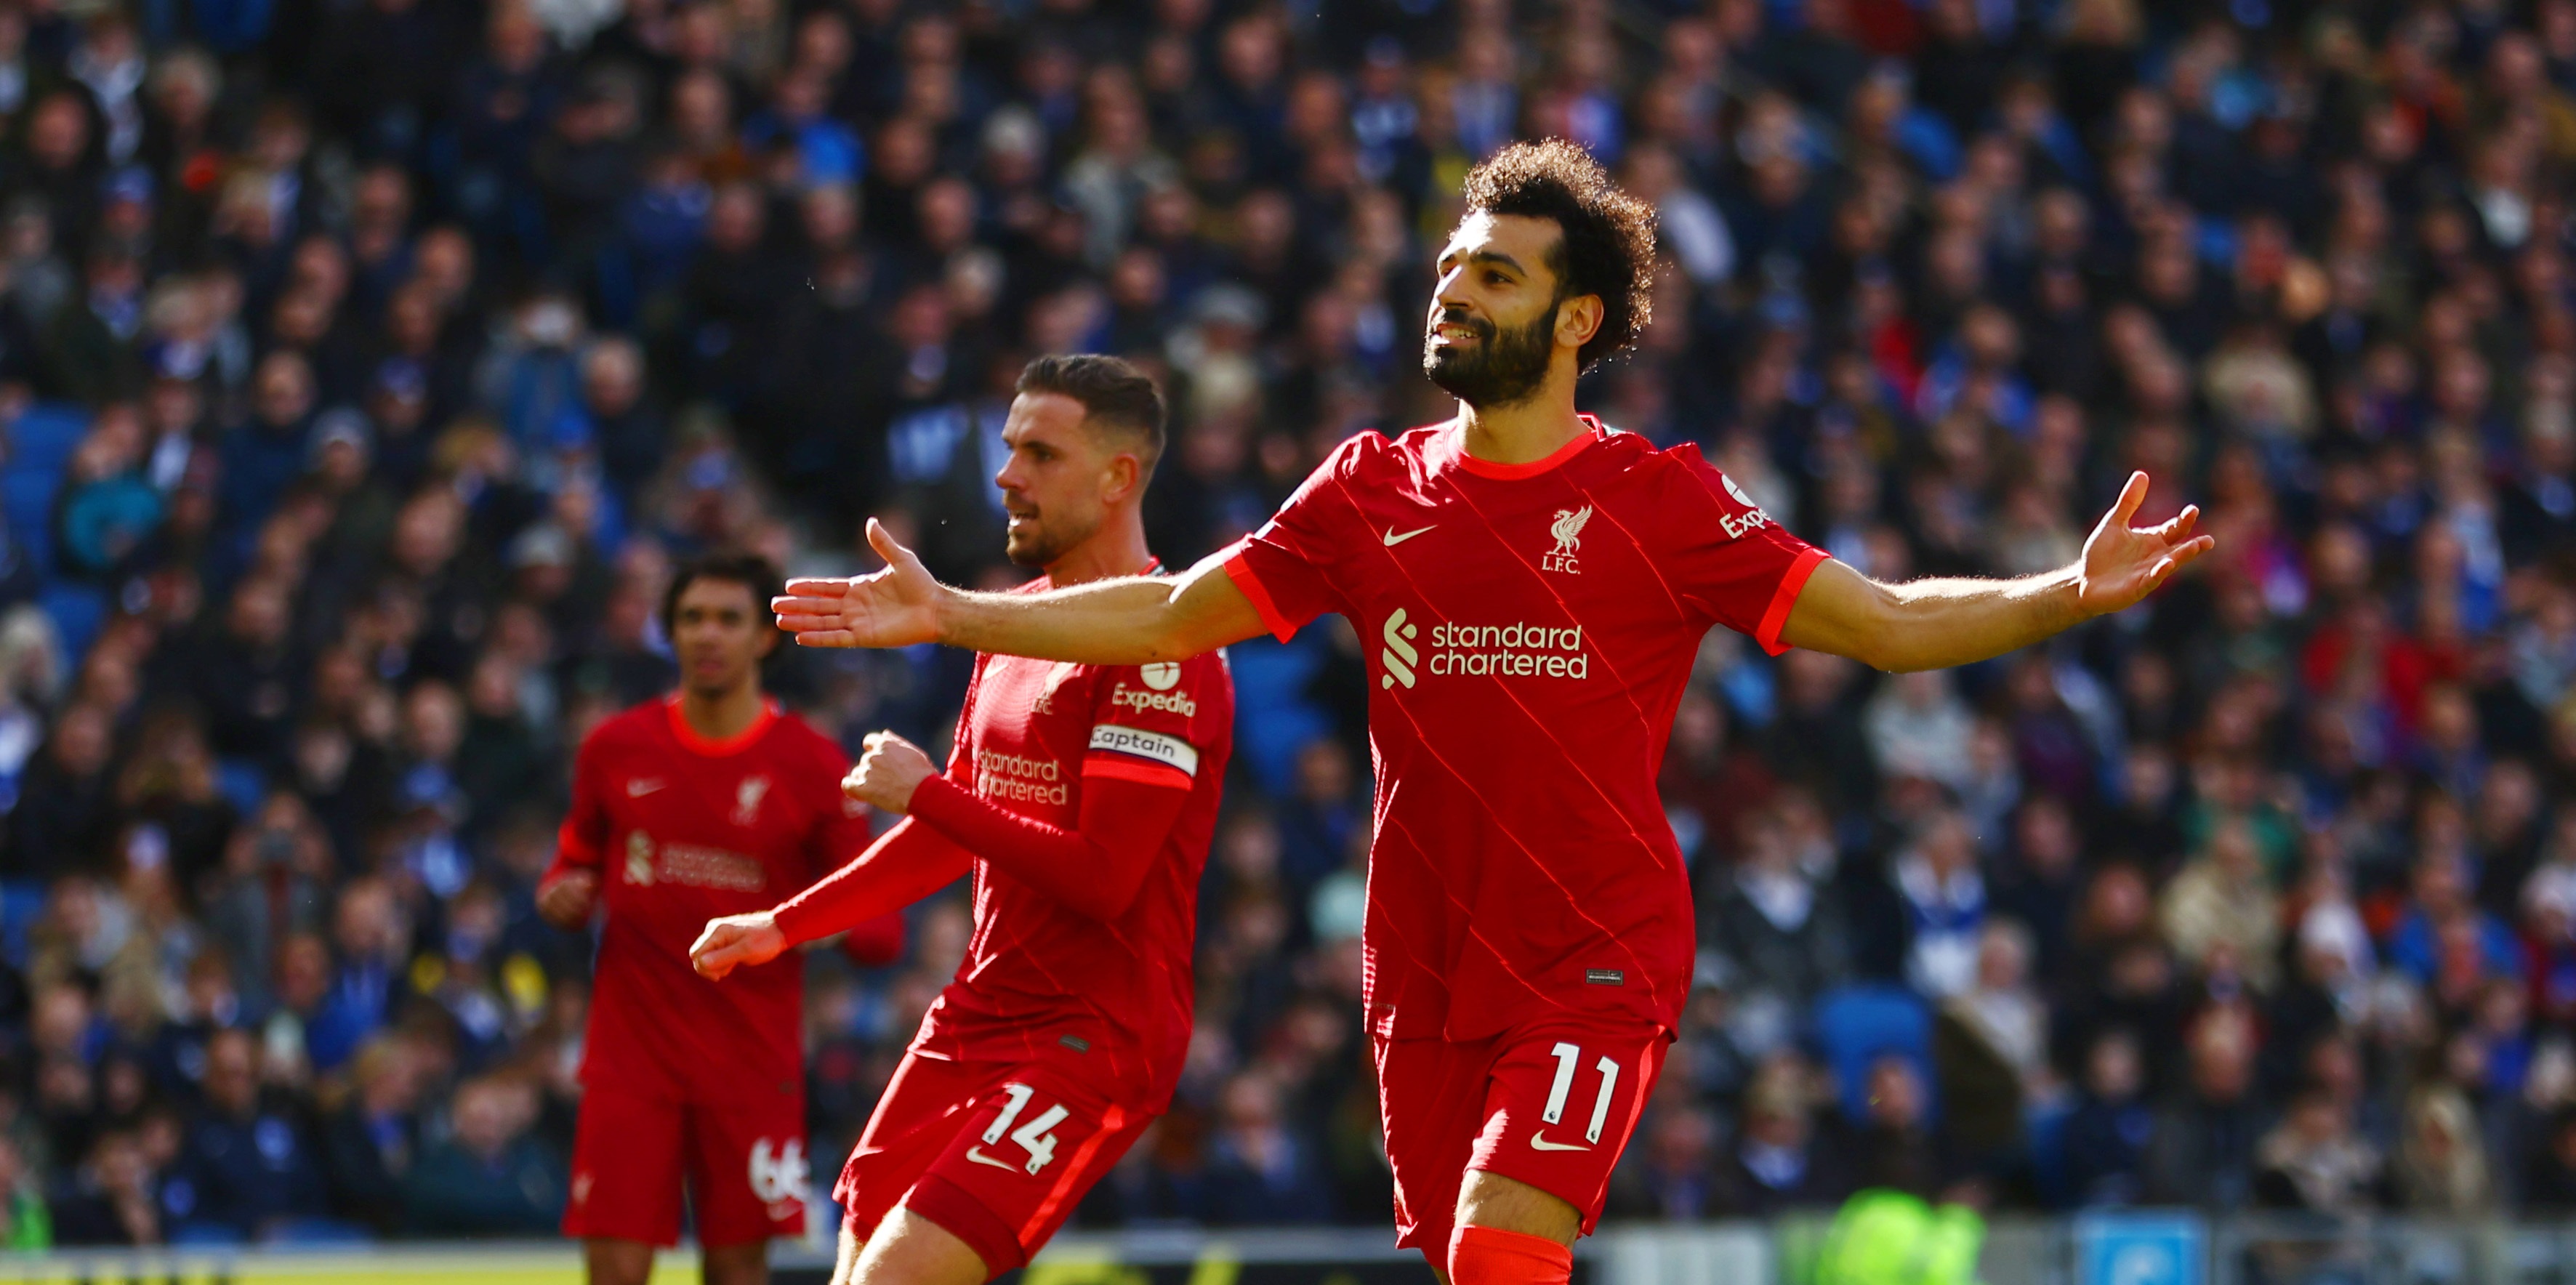 Danny Mills explains why Manchester City shouldn’t go for Liverpool’s Mo Salah